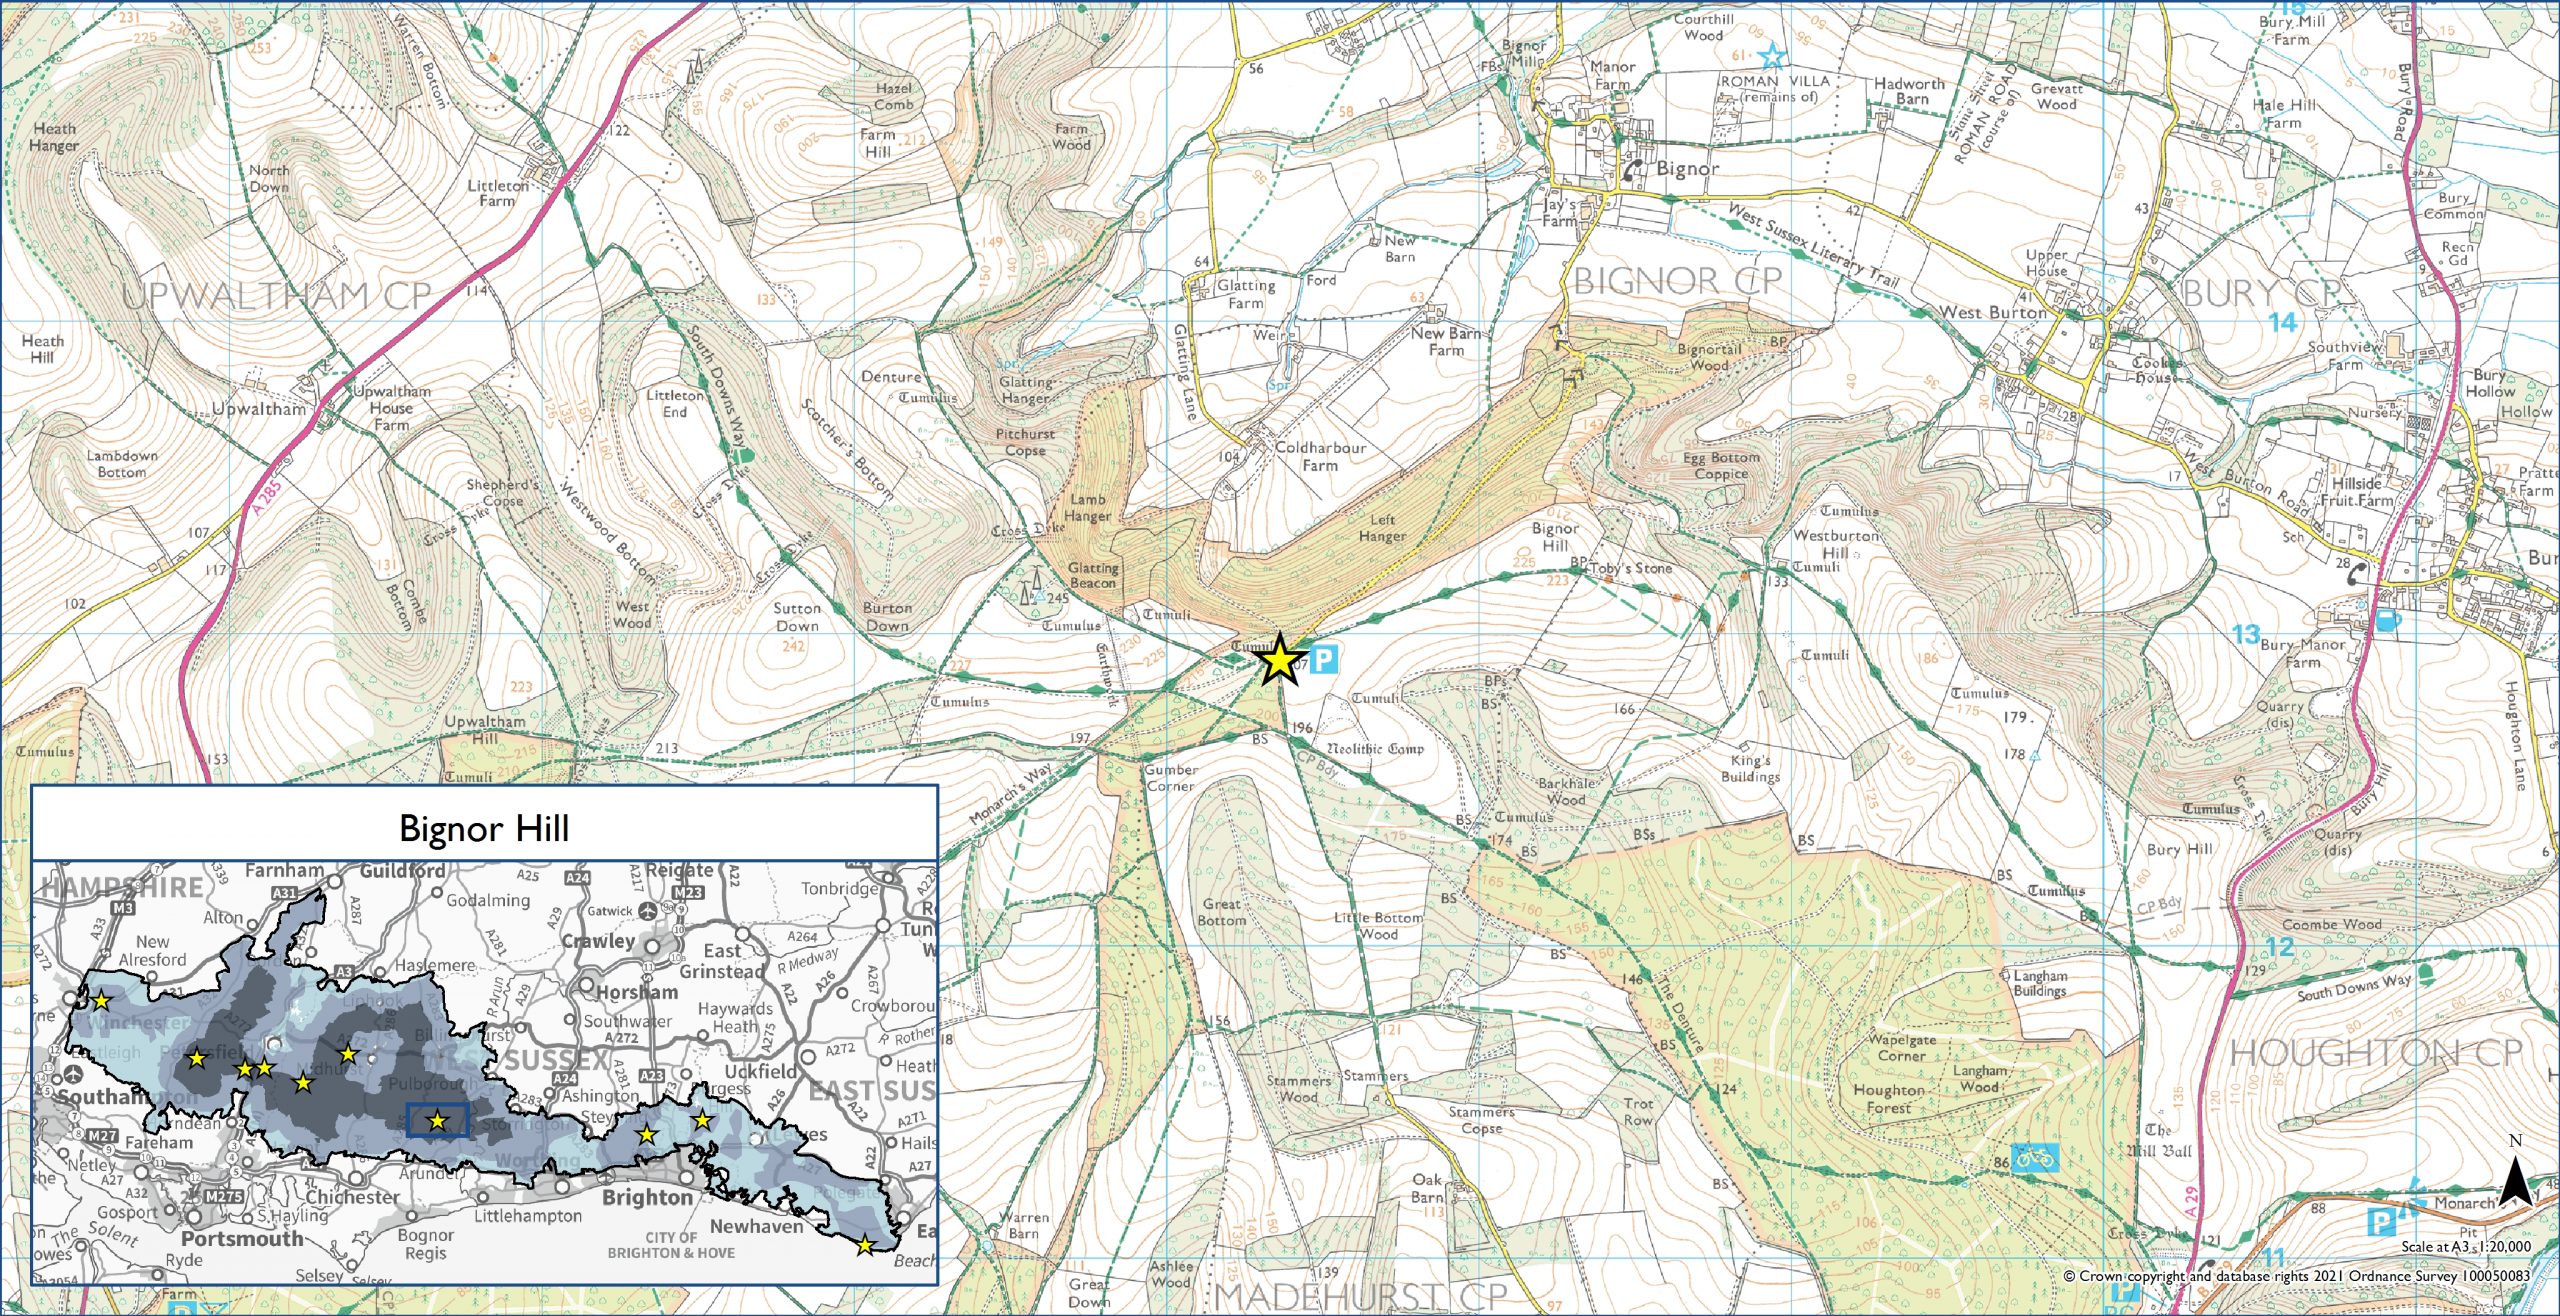 OS Map showing the location of Bignor Hill Dark Sky Discovery Site